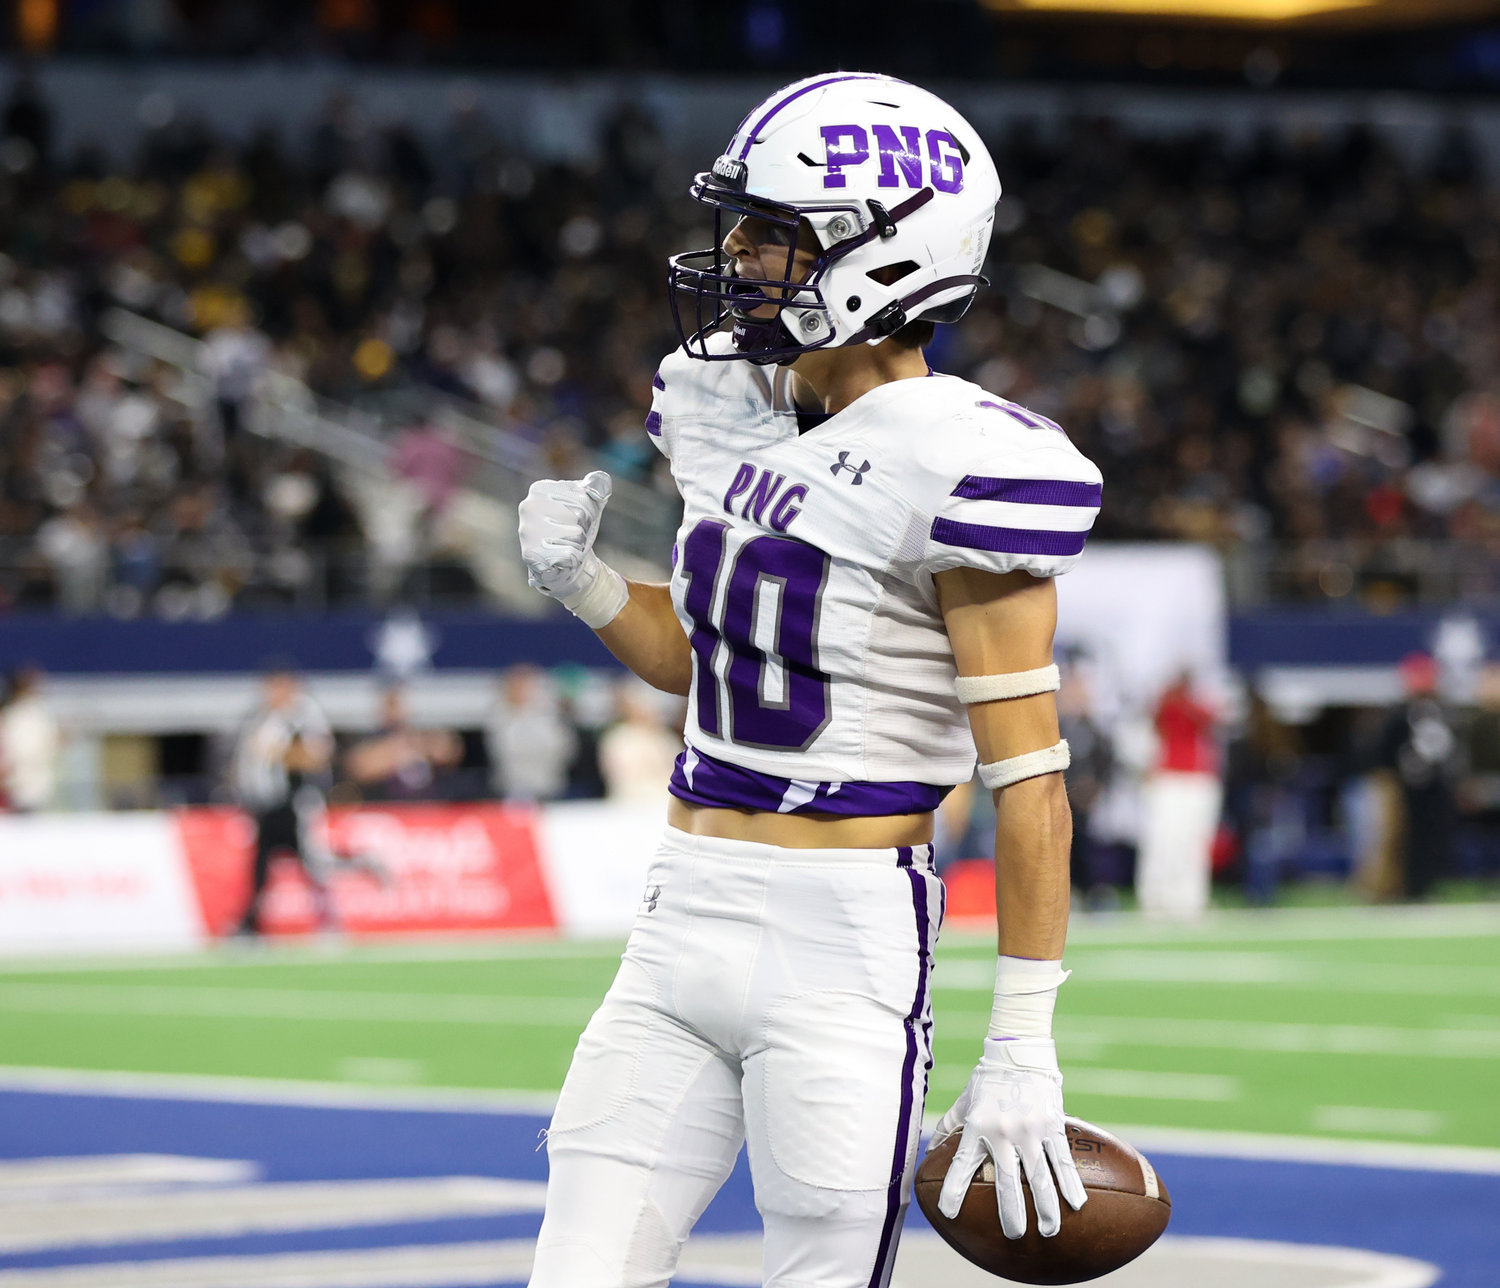 Port Neches-Groves defensive back Landon Guarnere (10) gestures in celebration after a touchdown during the Class 5A Division II football state championship game between South Oak Cliff and Port Neches-Groves in Arlington, Texas, on Dec. 16, 2022.